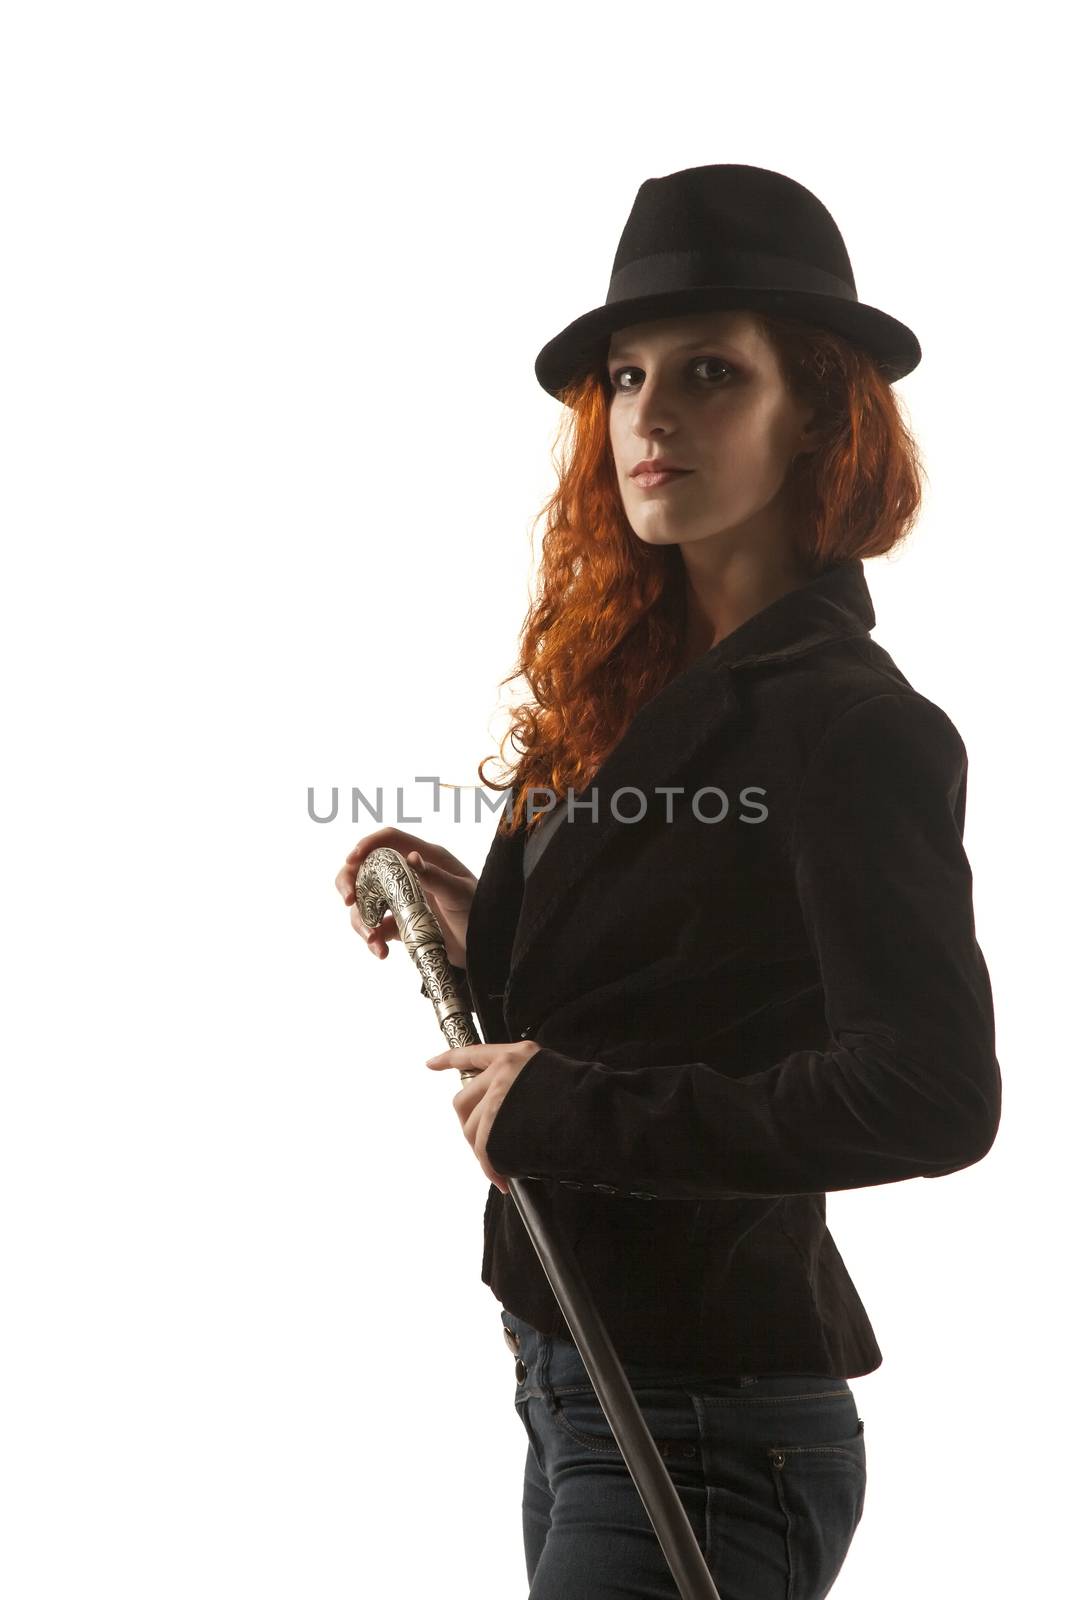 Serious red hair lady with a hat and special walking stick (contrast lightning)